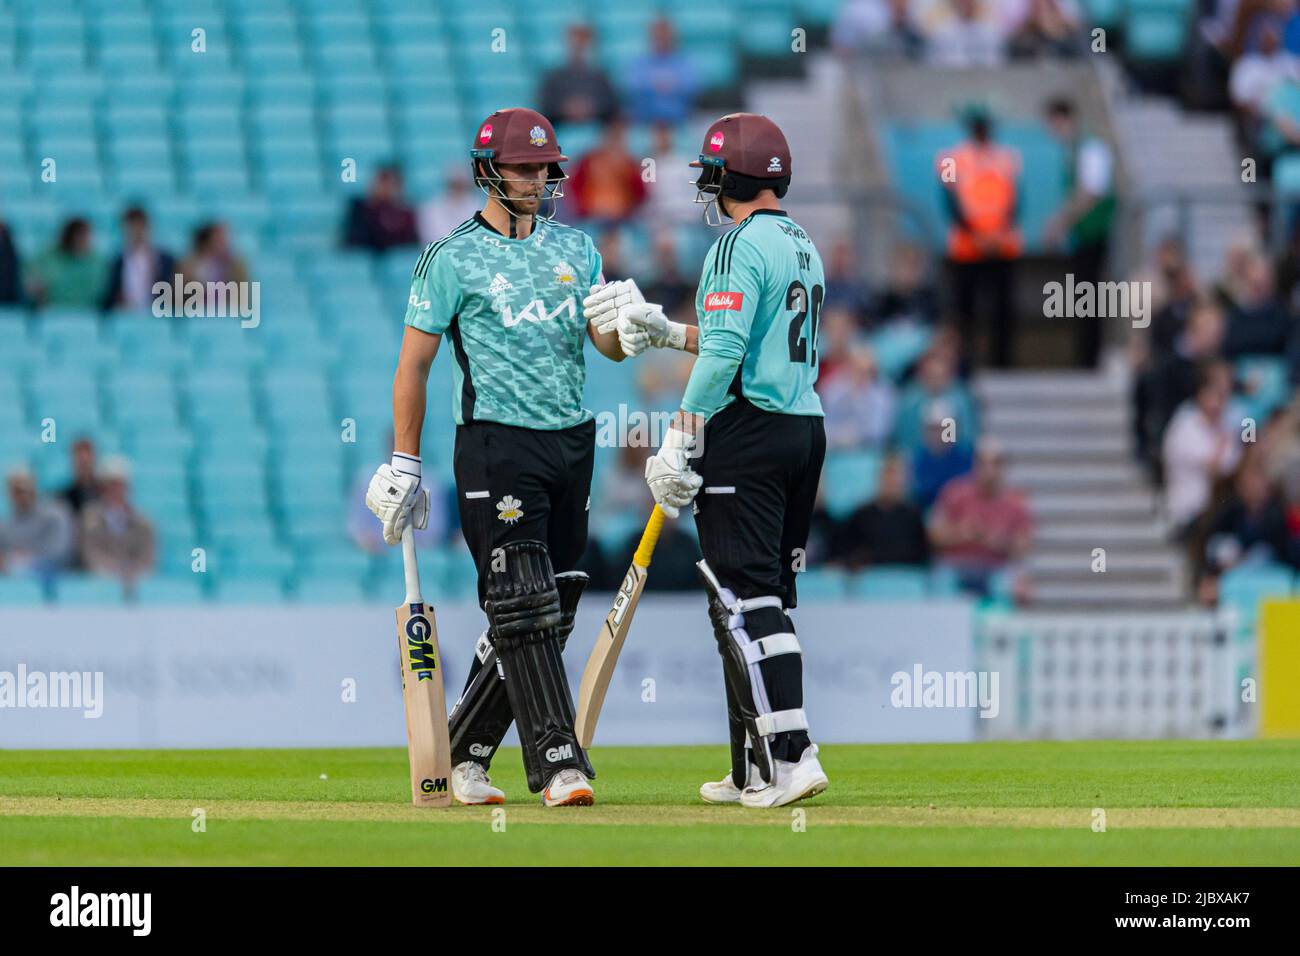 LONDON, UNITED KINGDOM. 08th Jun, 2022. Will Jacks of Surrey Cricket Club (left) and Jason Roy of Surrey Cricket Club (right) during Vitality Blast - Surry vs Sussex Sharks at The Kia Oval Cricket Ground on Wednesday, June 08, 2022 in LONDON ENGLAND.  Credit: Taka G Wu/Alamy Live News Stock Photo